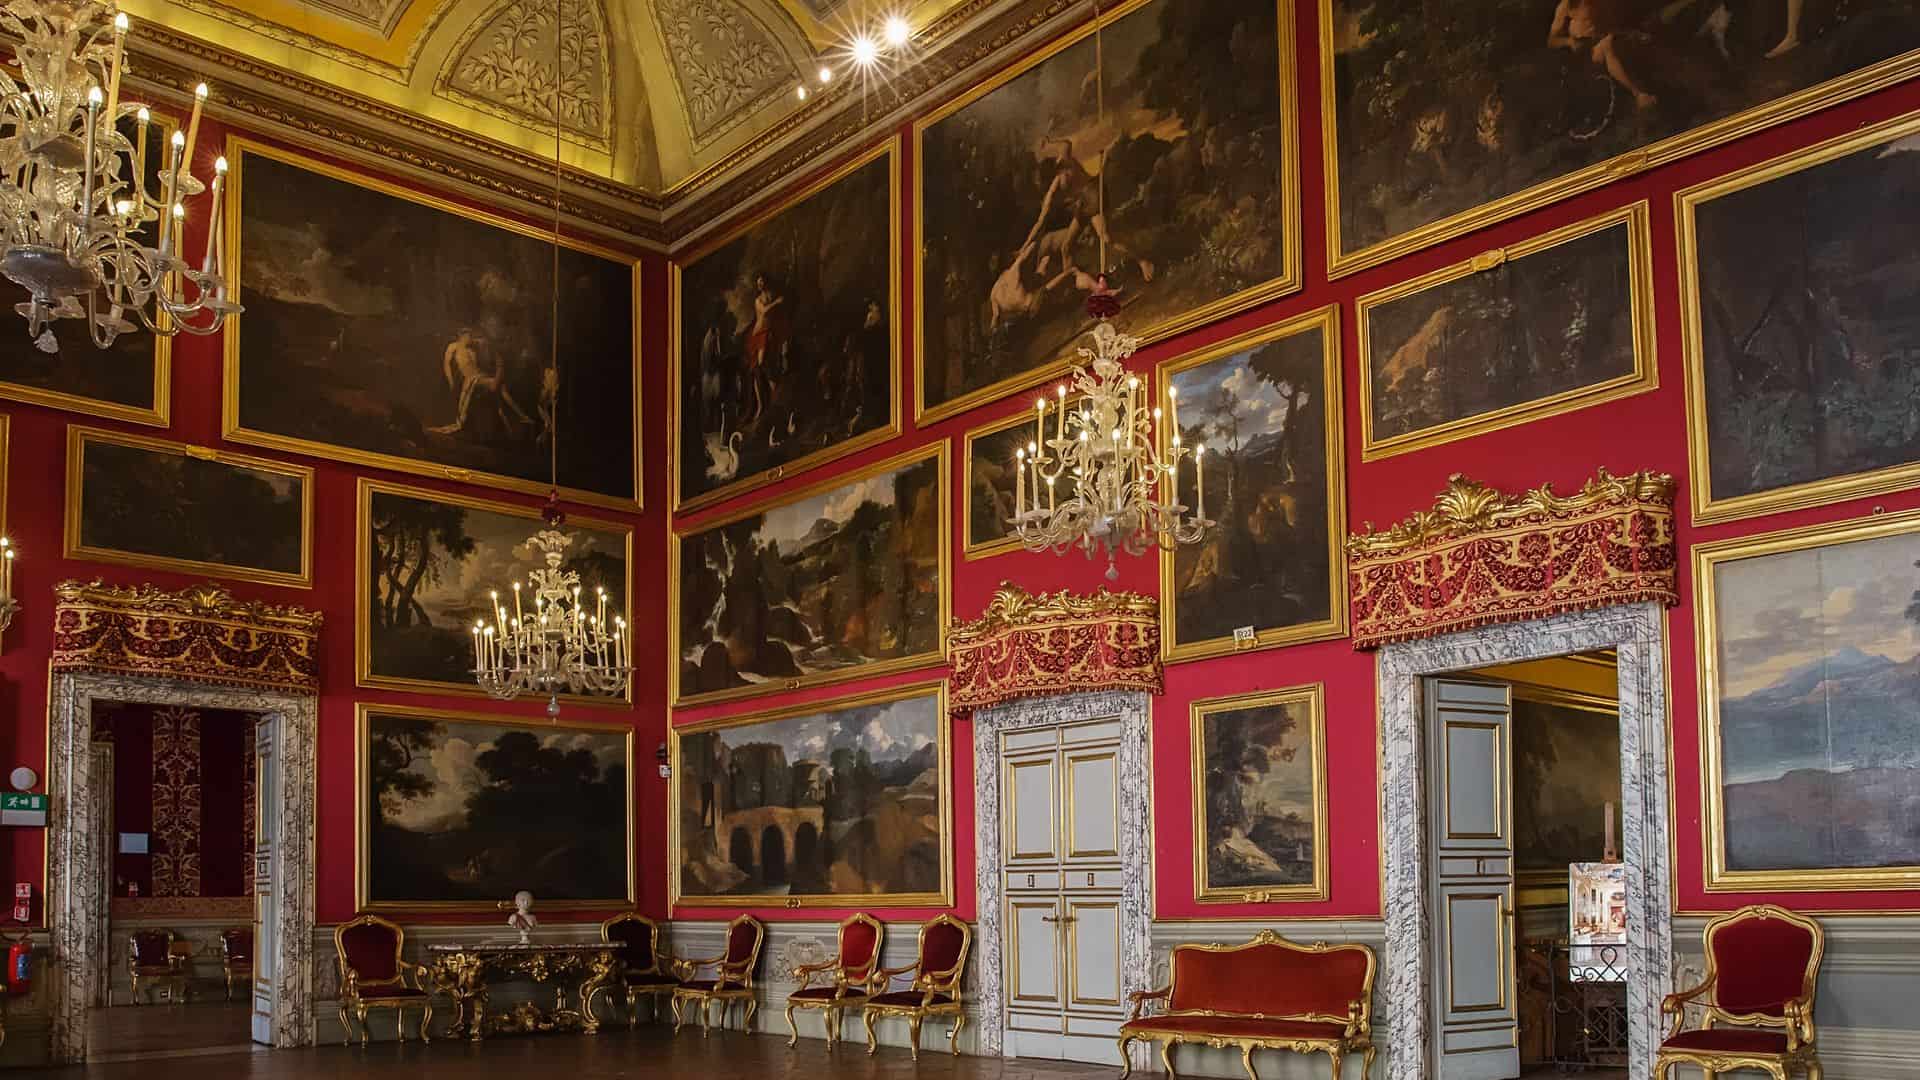 The interior of a red-walled and gilded room filled with paintings inside the Doria Pamphilj Gallery.